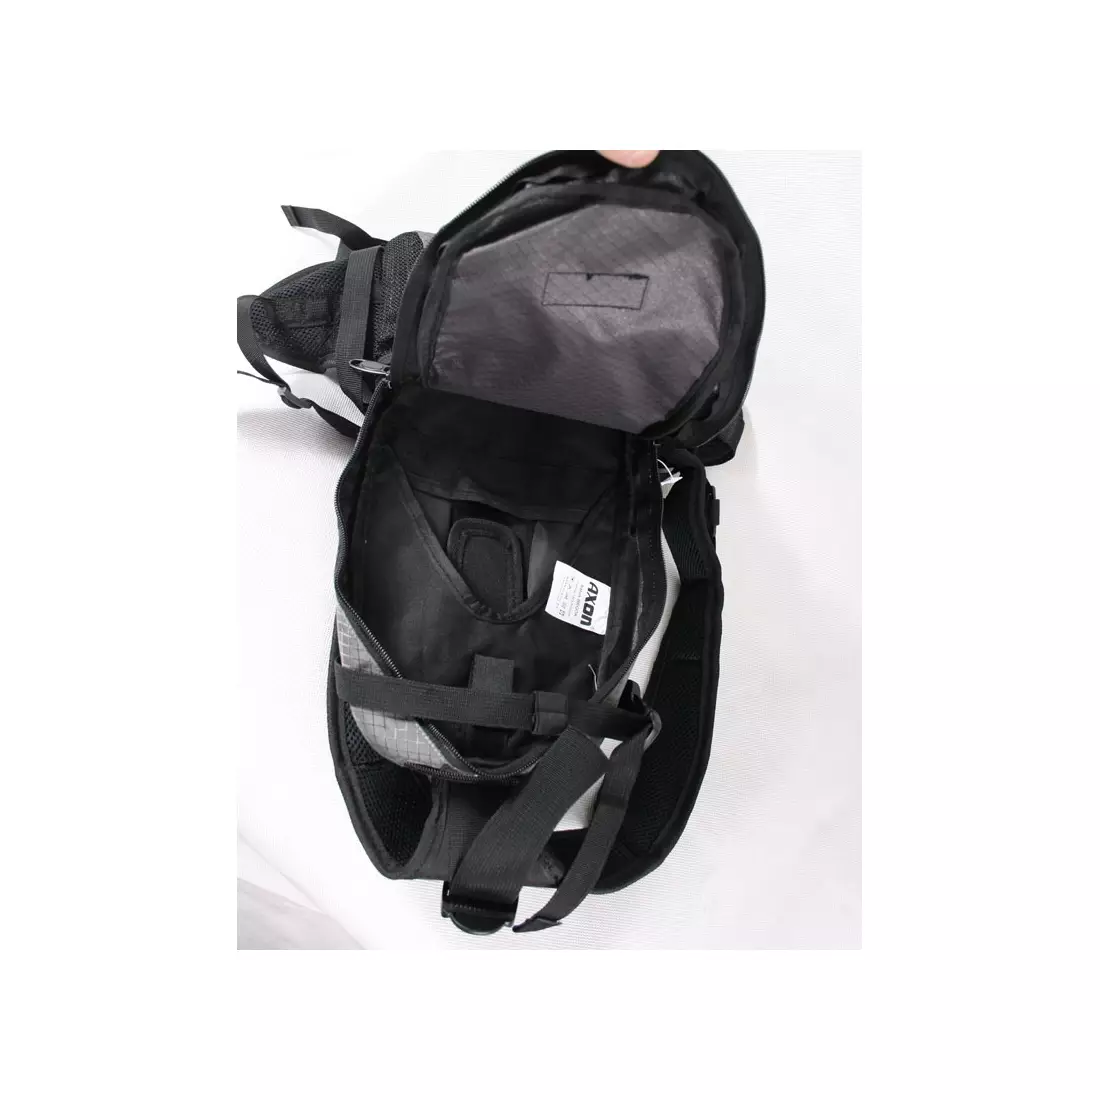 AXON BROOK - 8L bicycle backpack - color: Gray